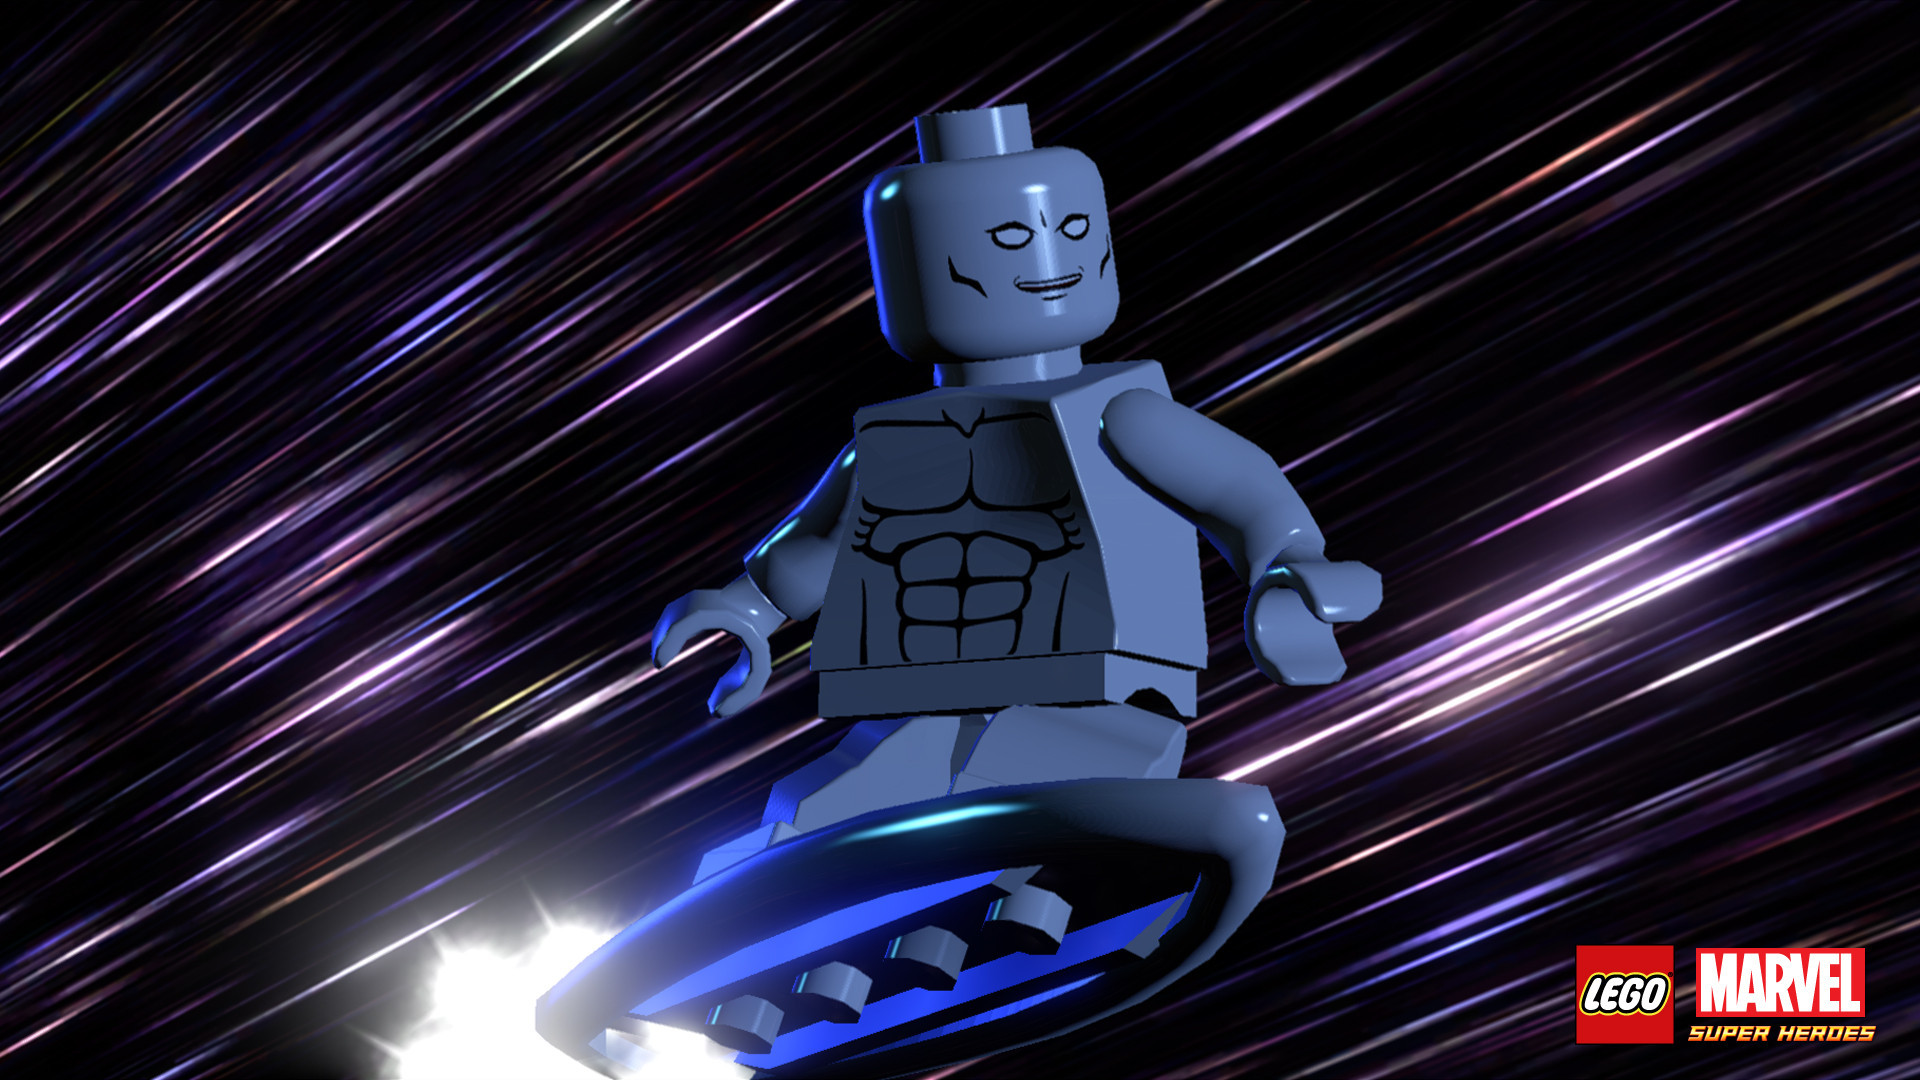 The Silver Surfer as he appears in Lego Marvel Superheroes